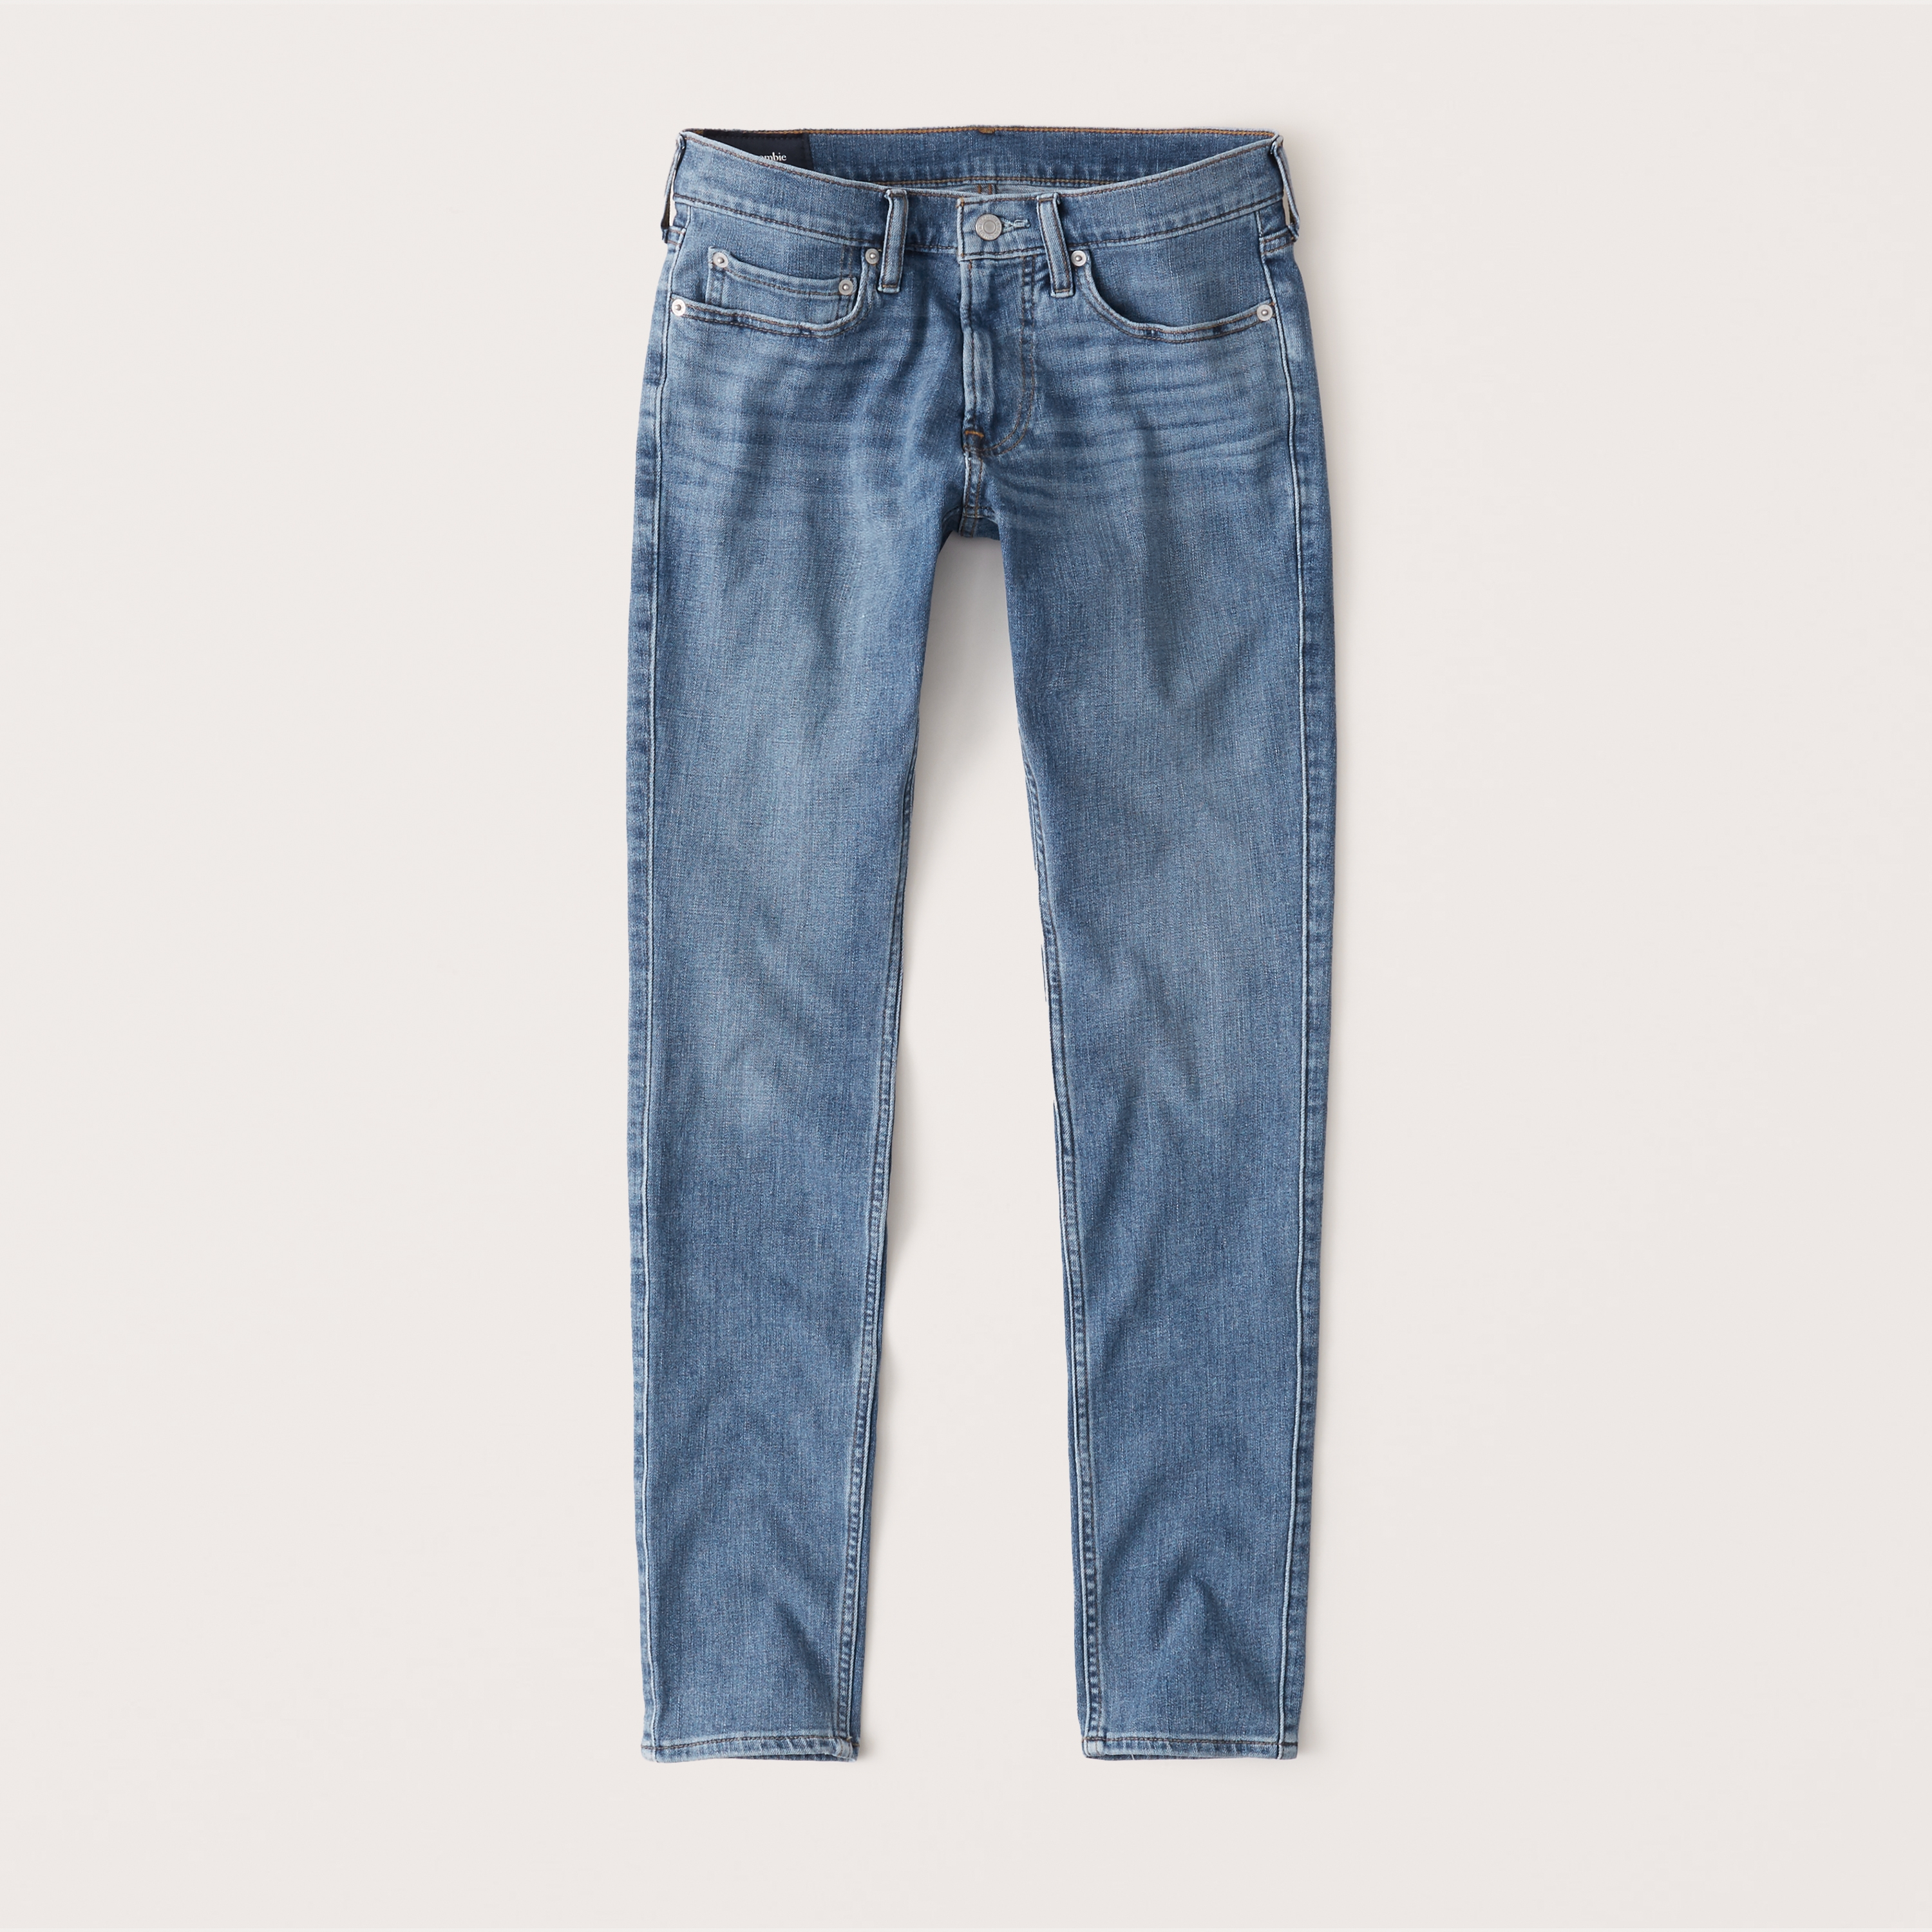 a&f extreme skinny jeans